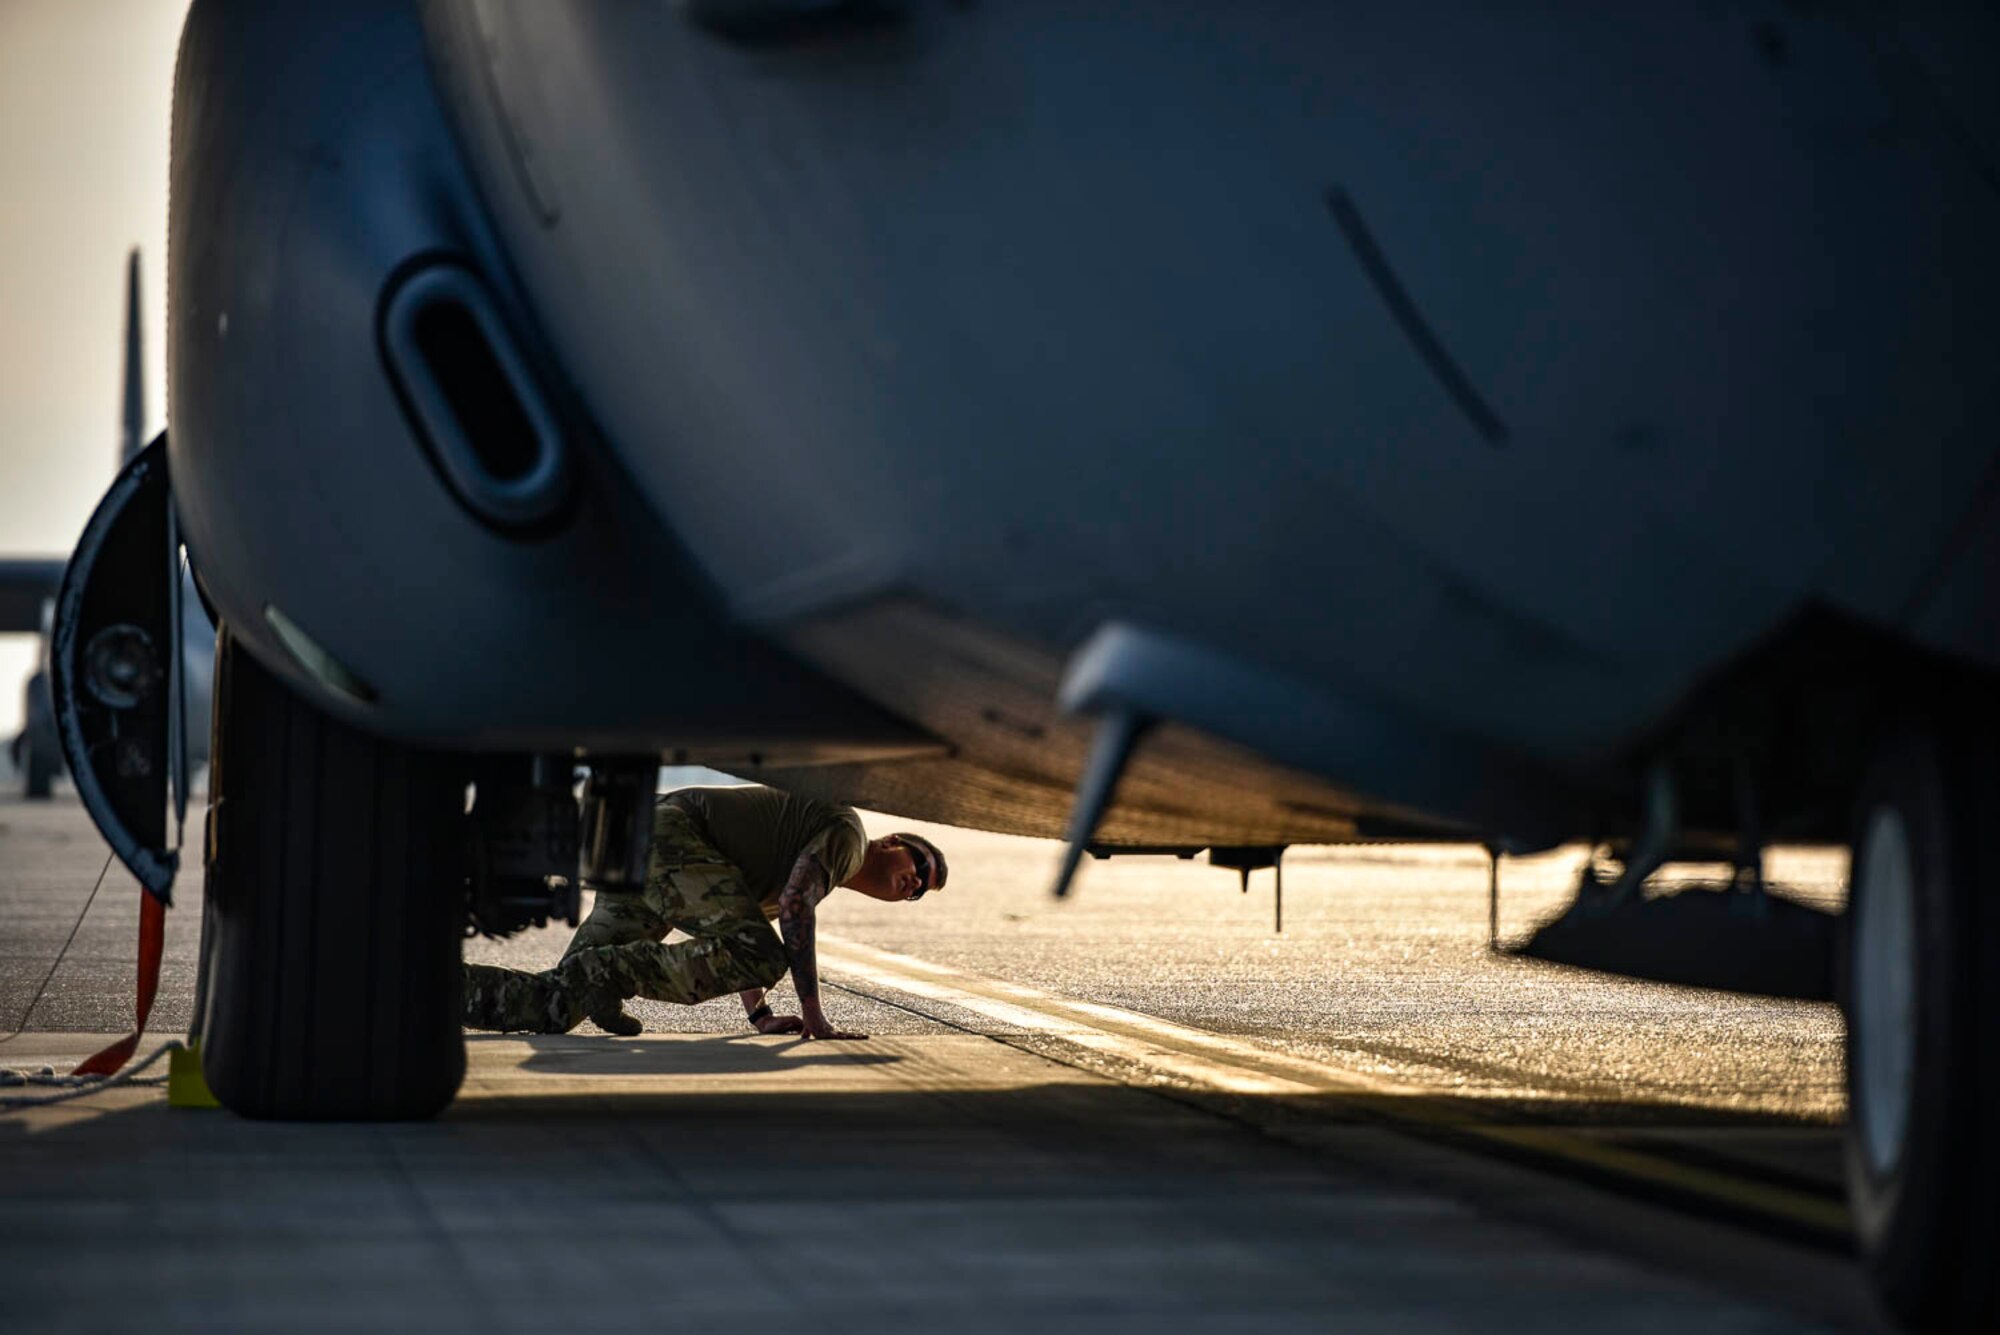 Tech. Sgt. William Mcleod, 327th Airlift Squadron loadmaster, conducts pre-flight checks before take-off as part of the Turkey Shoot competition August 7, 2019, at Little Rock Air Force Base, Ark. The Turkey Shoot is a multi-event test which evaluates all aspects of combat airlift such as threat mitigation, container delivery system airdrops, assault landings and loading and offloading vehicles. The majority of our Reserve members must meet the same requirements of Active Duty personnel. This entails balancing a fulltime civilian job or college studies while maintaining their military readiness. (U.S. Air Force Reserve photo by Senior Airman Nathan Byrnes)